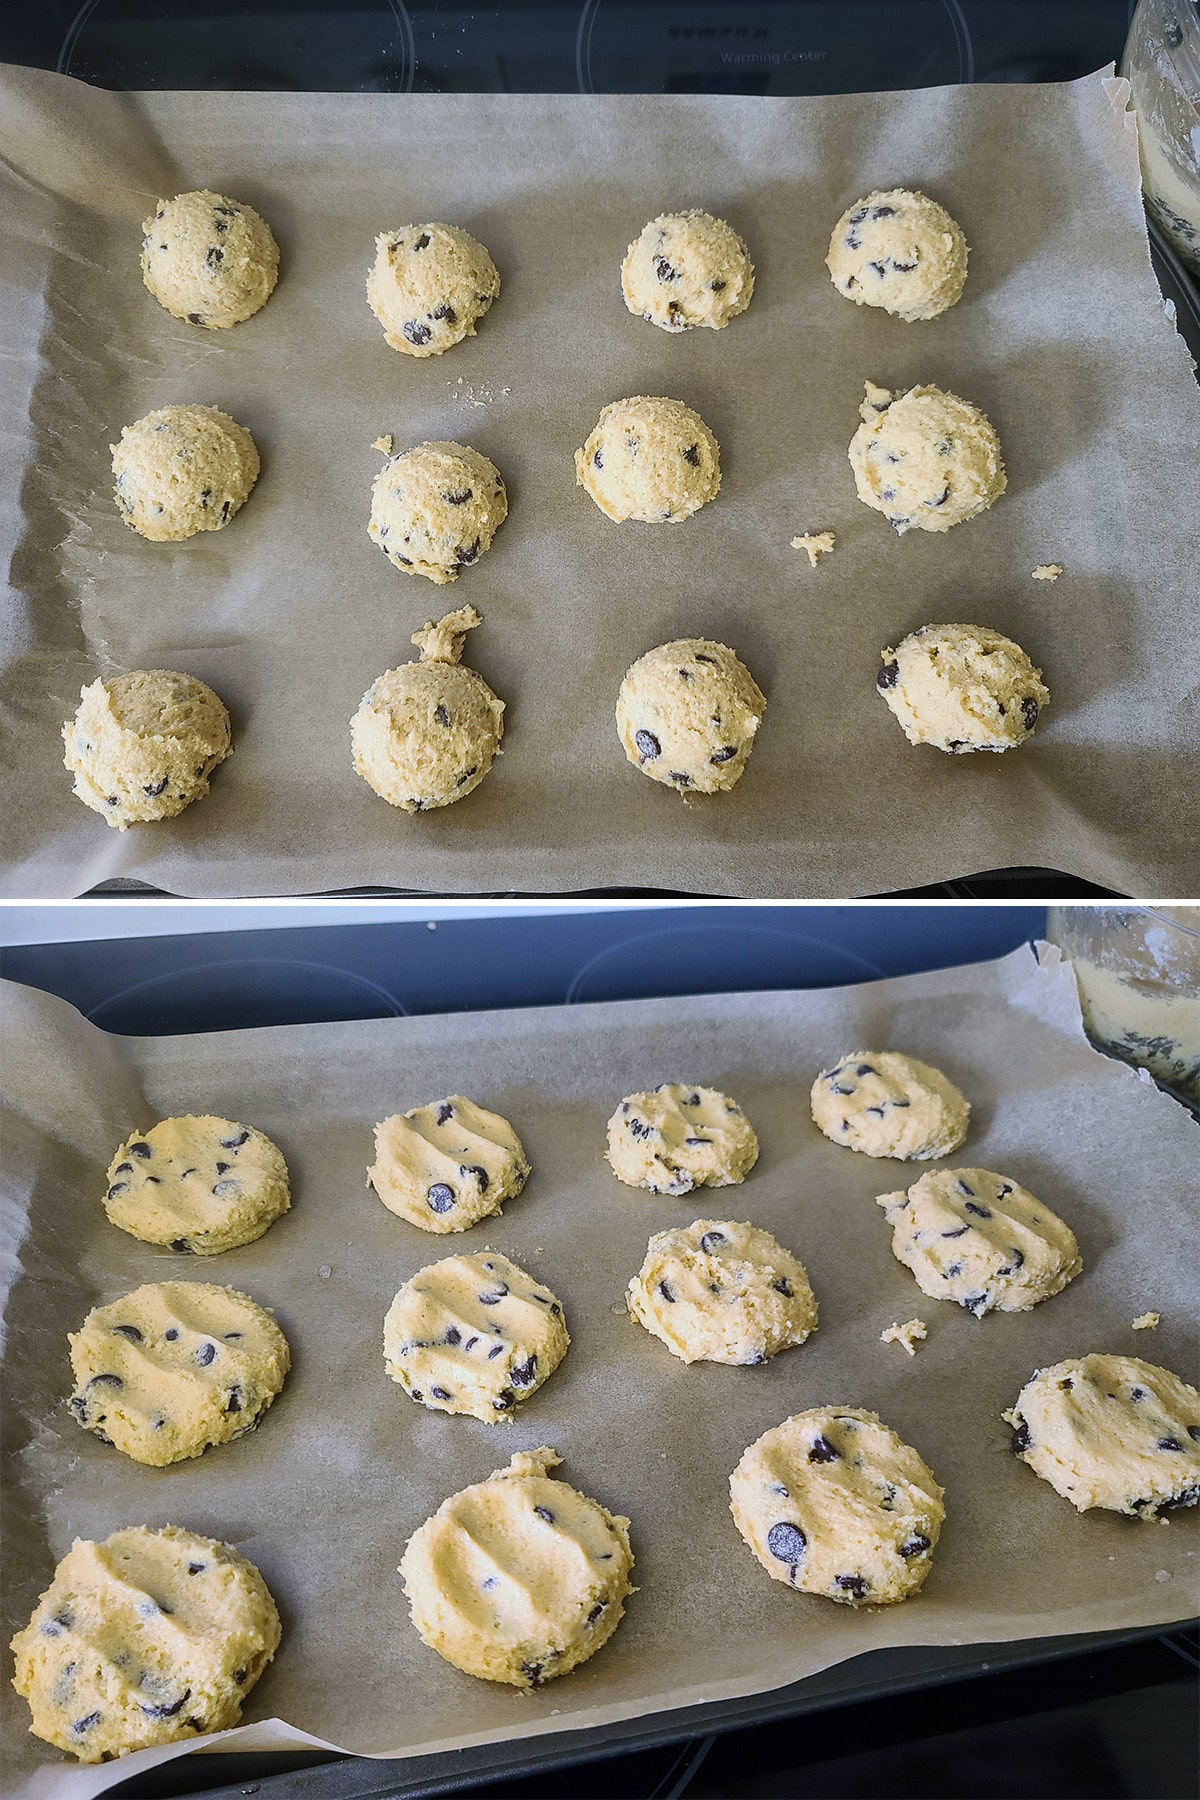 A two part image showing the balls of keto cookie dough on a lined baking sheet, before and after being slightly flattened.